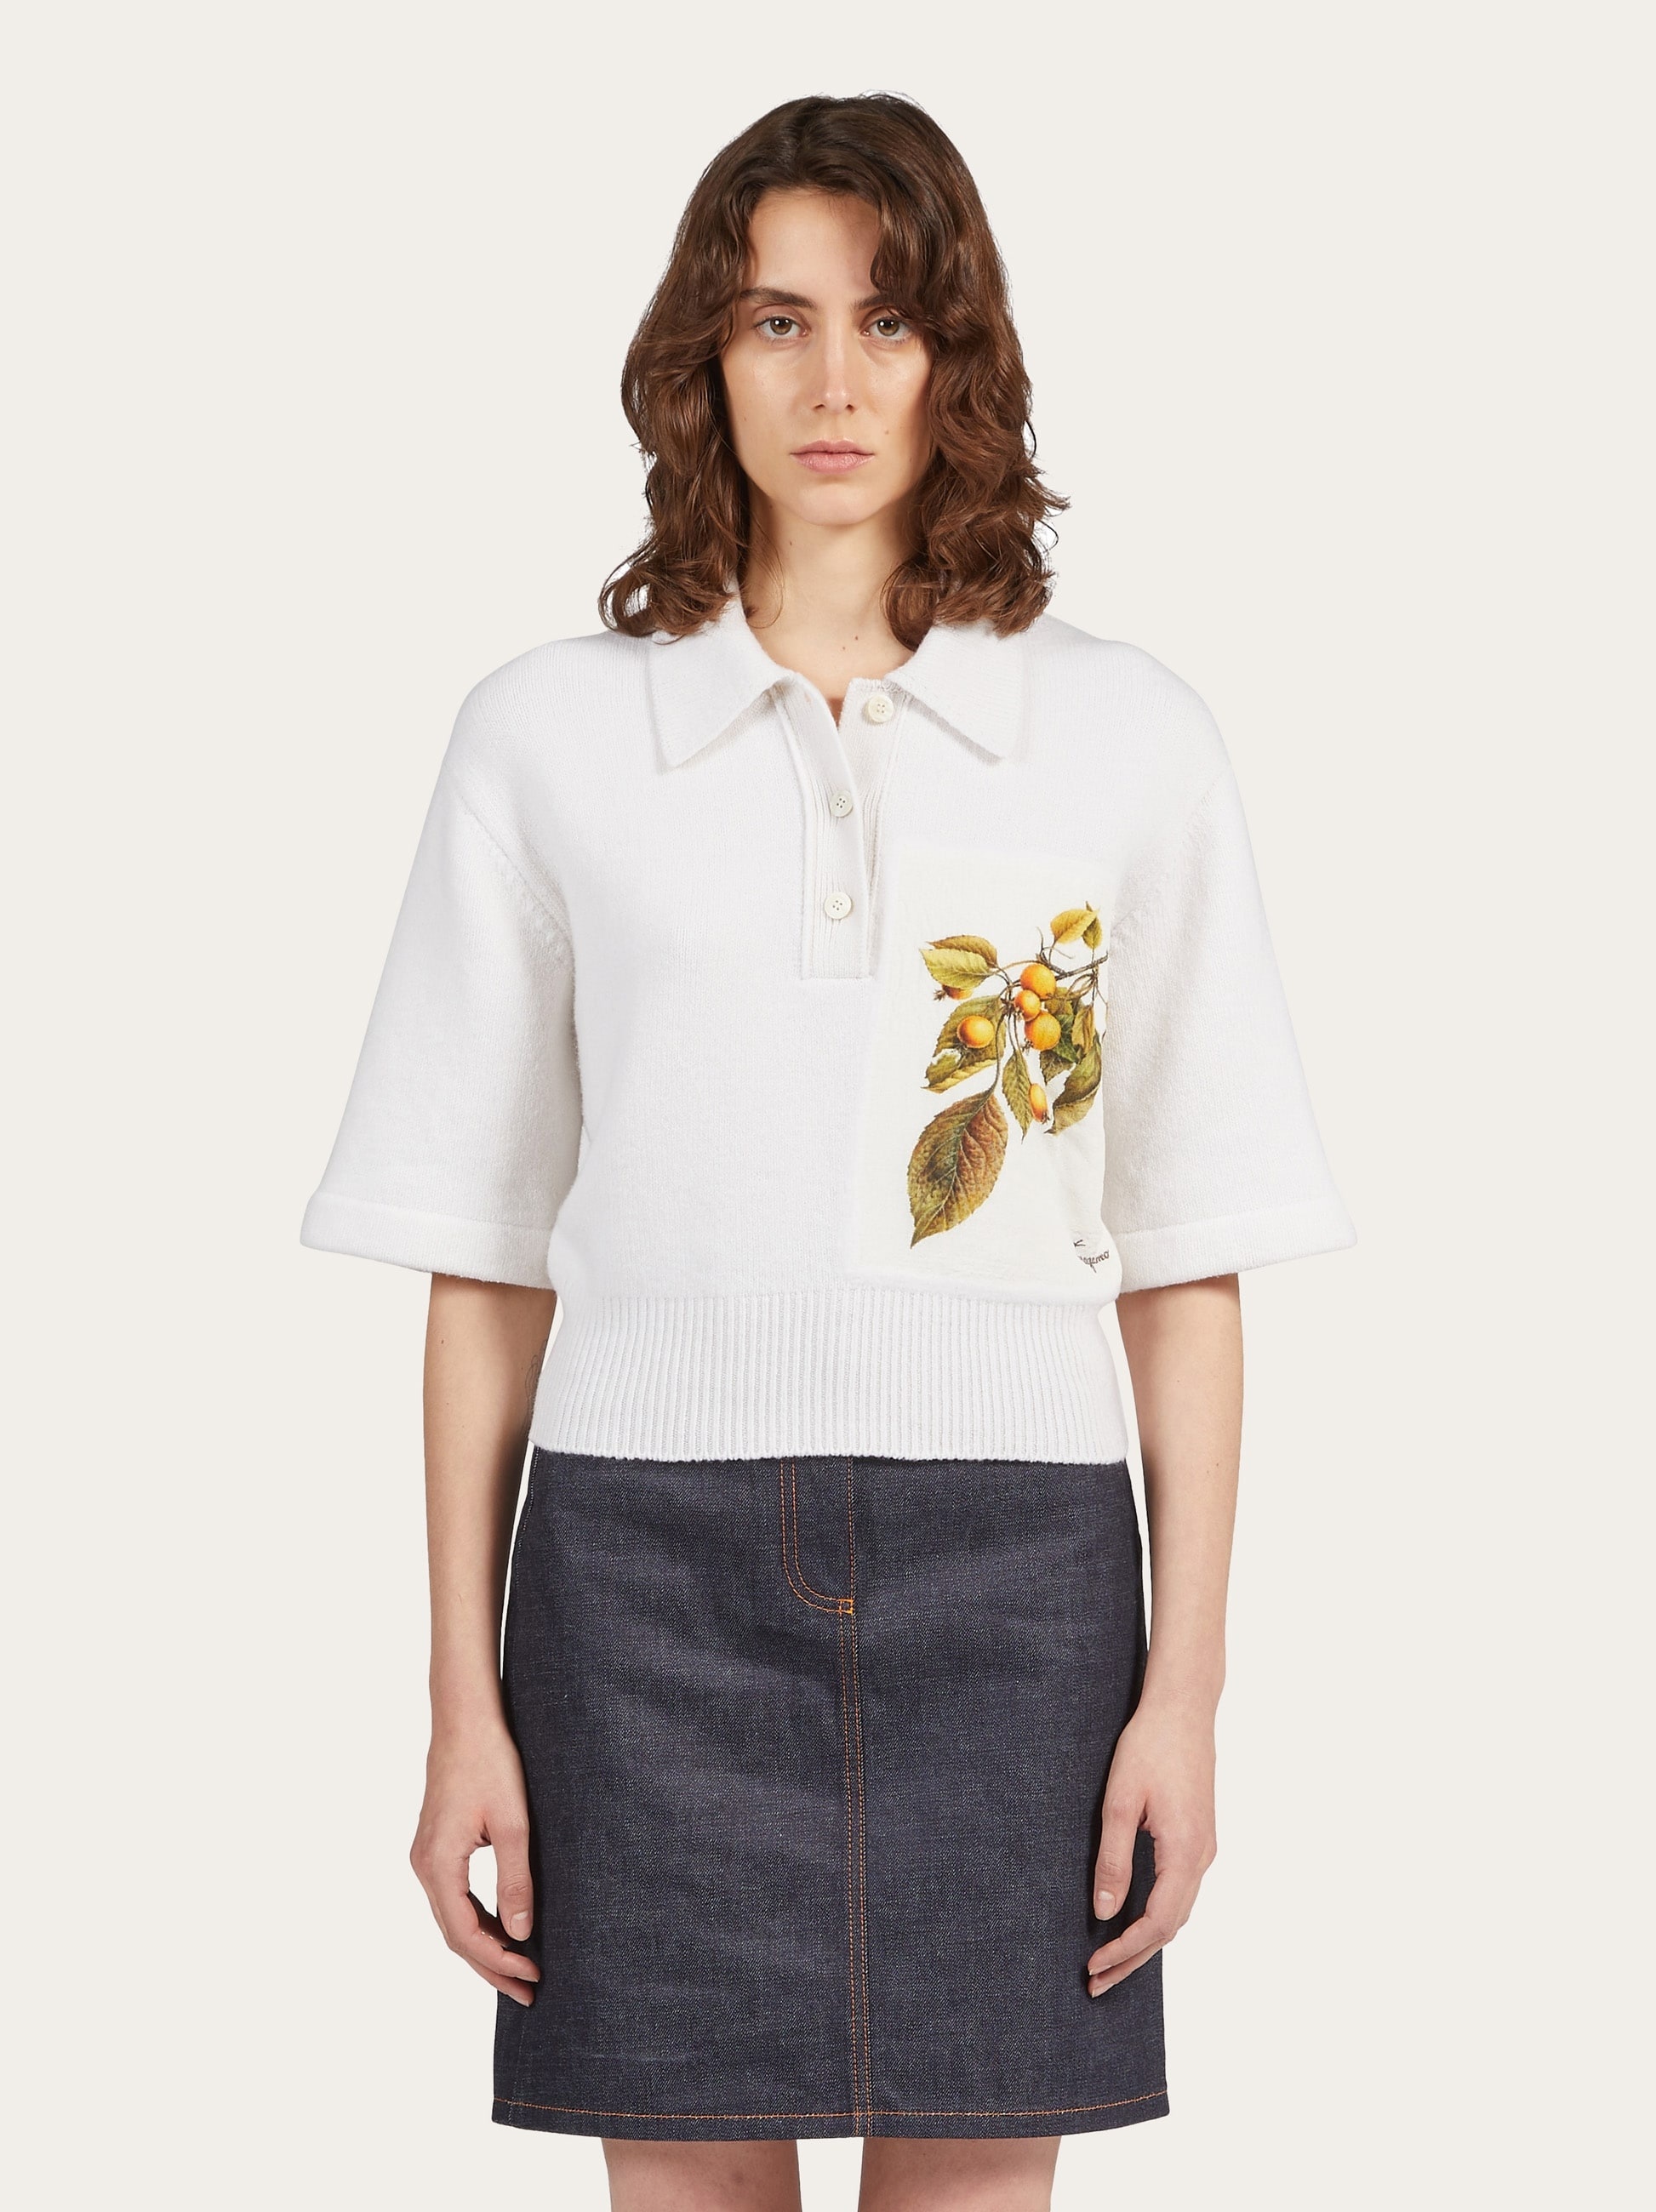 Cashmere polo with botanical motif - 2